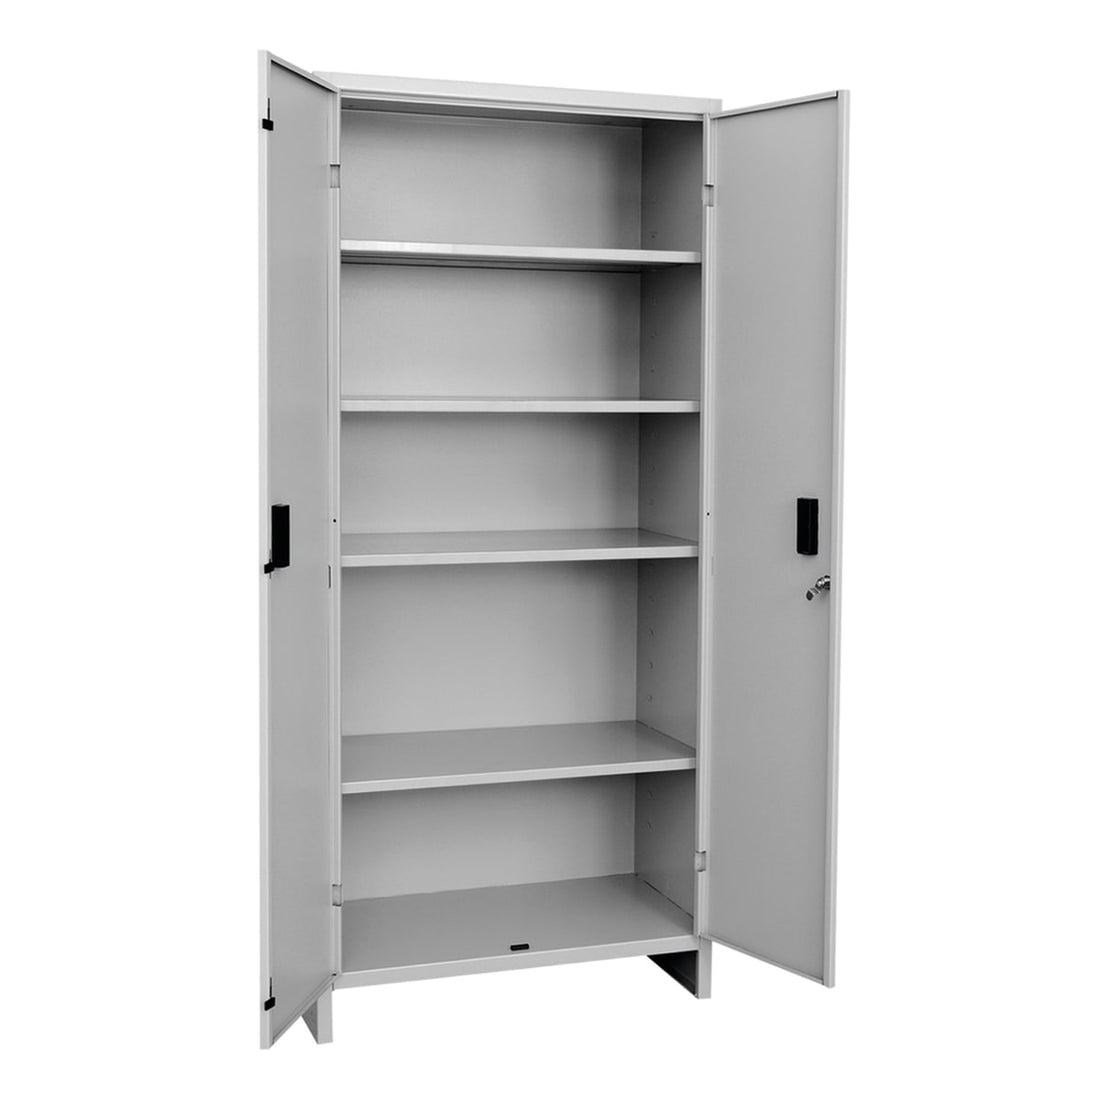 W60xD40xH179CM METAL CABINET WITH RACKS IN GREY COLOUR